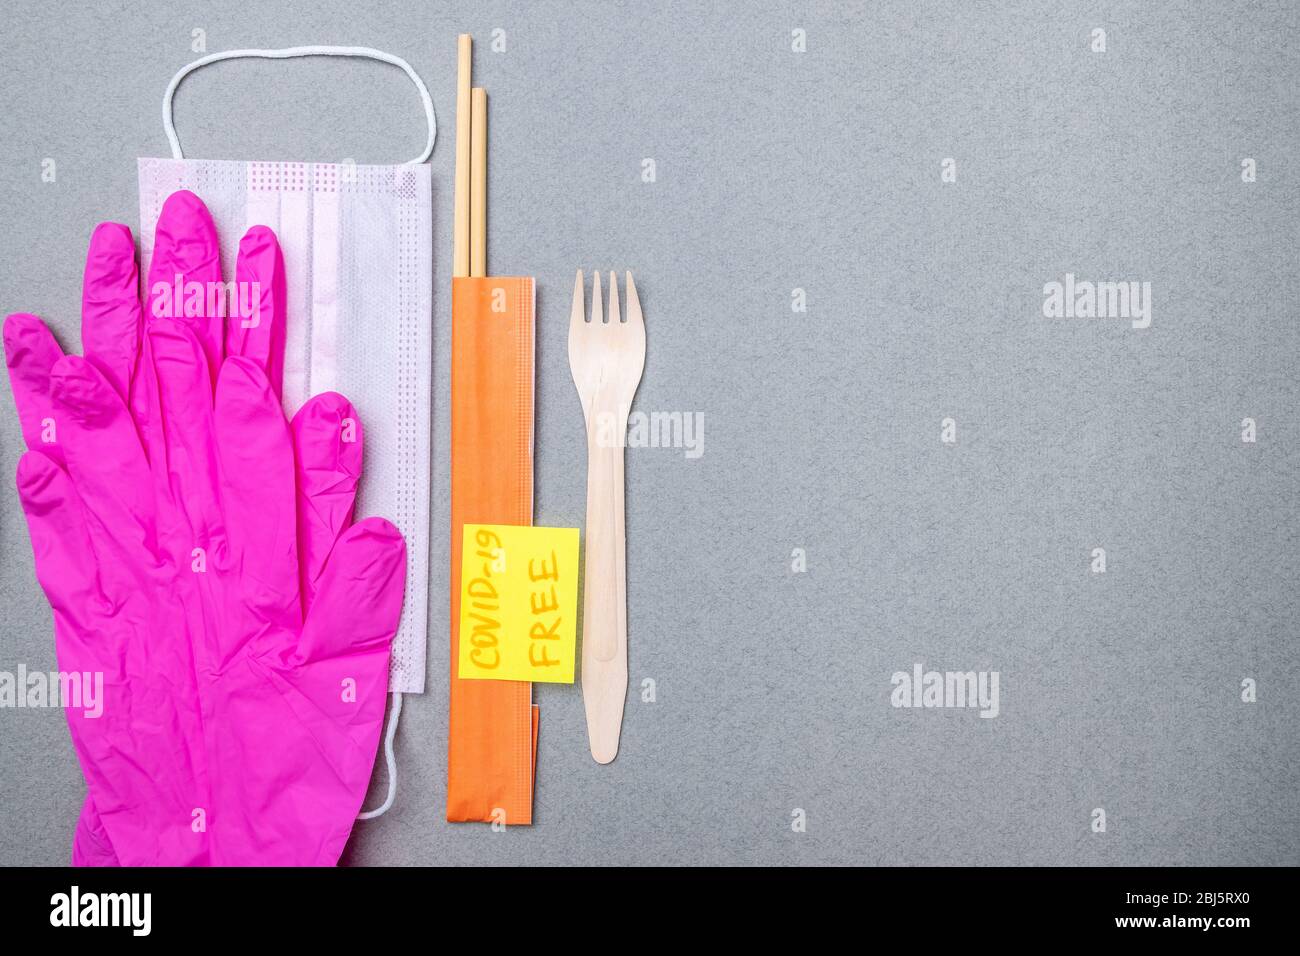 Insulation Gloves Knife And Glasses Stock Photo - Download Image Now -  Insulation, Rolled Up, Pink Color - iStock